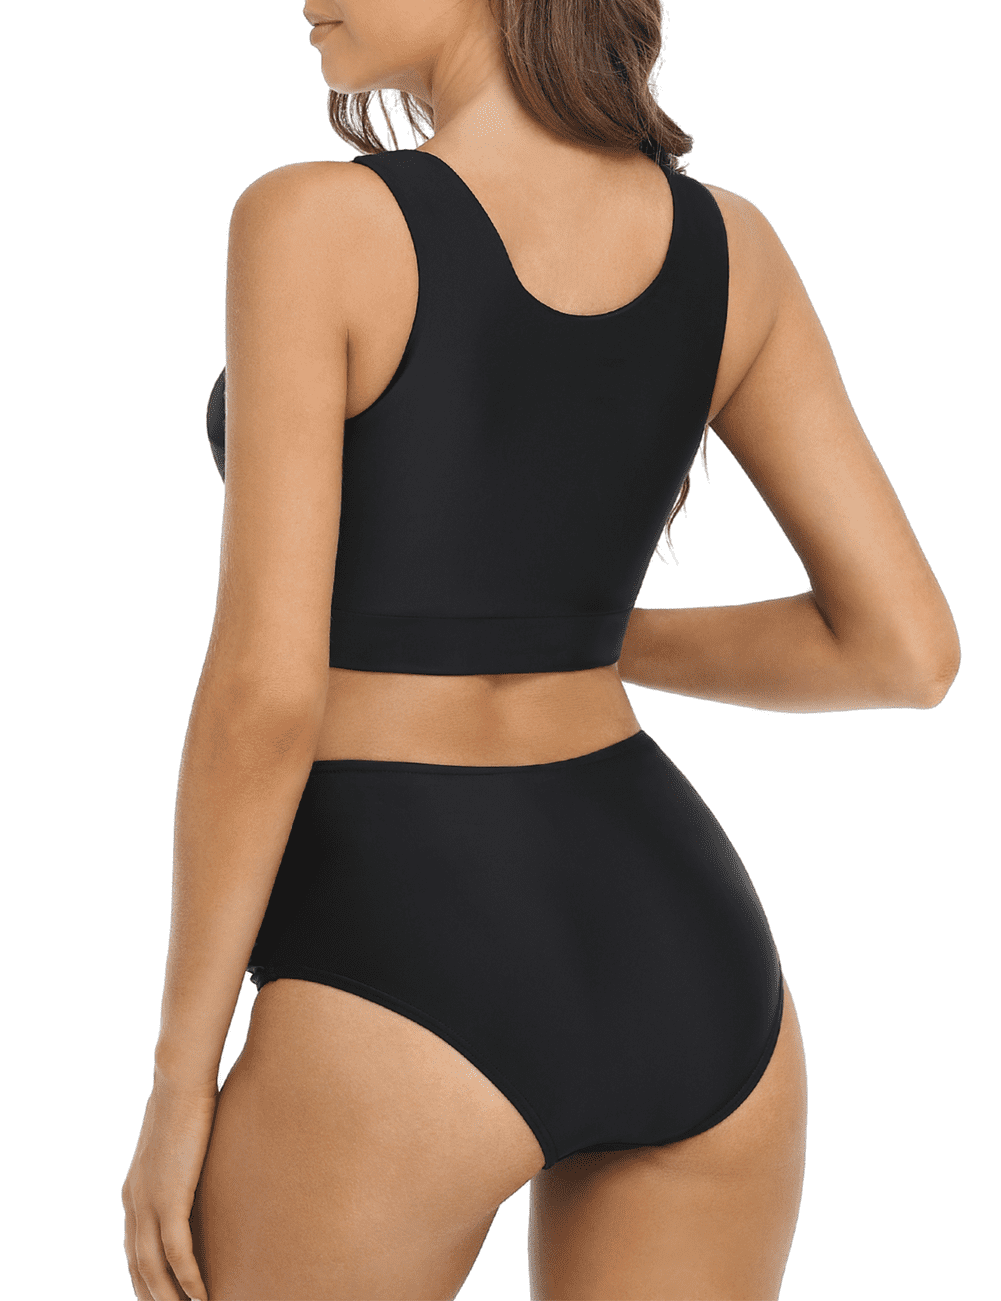 Hilor Women's High Waisted Bikini Two Piece Swimsuits High Neck Bathing  Suits Knotted Front Tankini Sets 